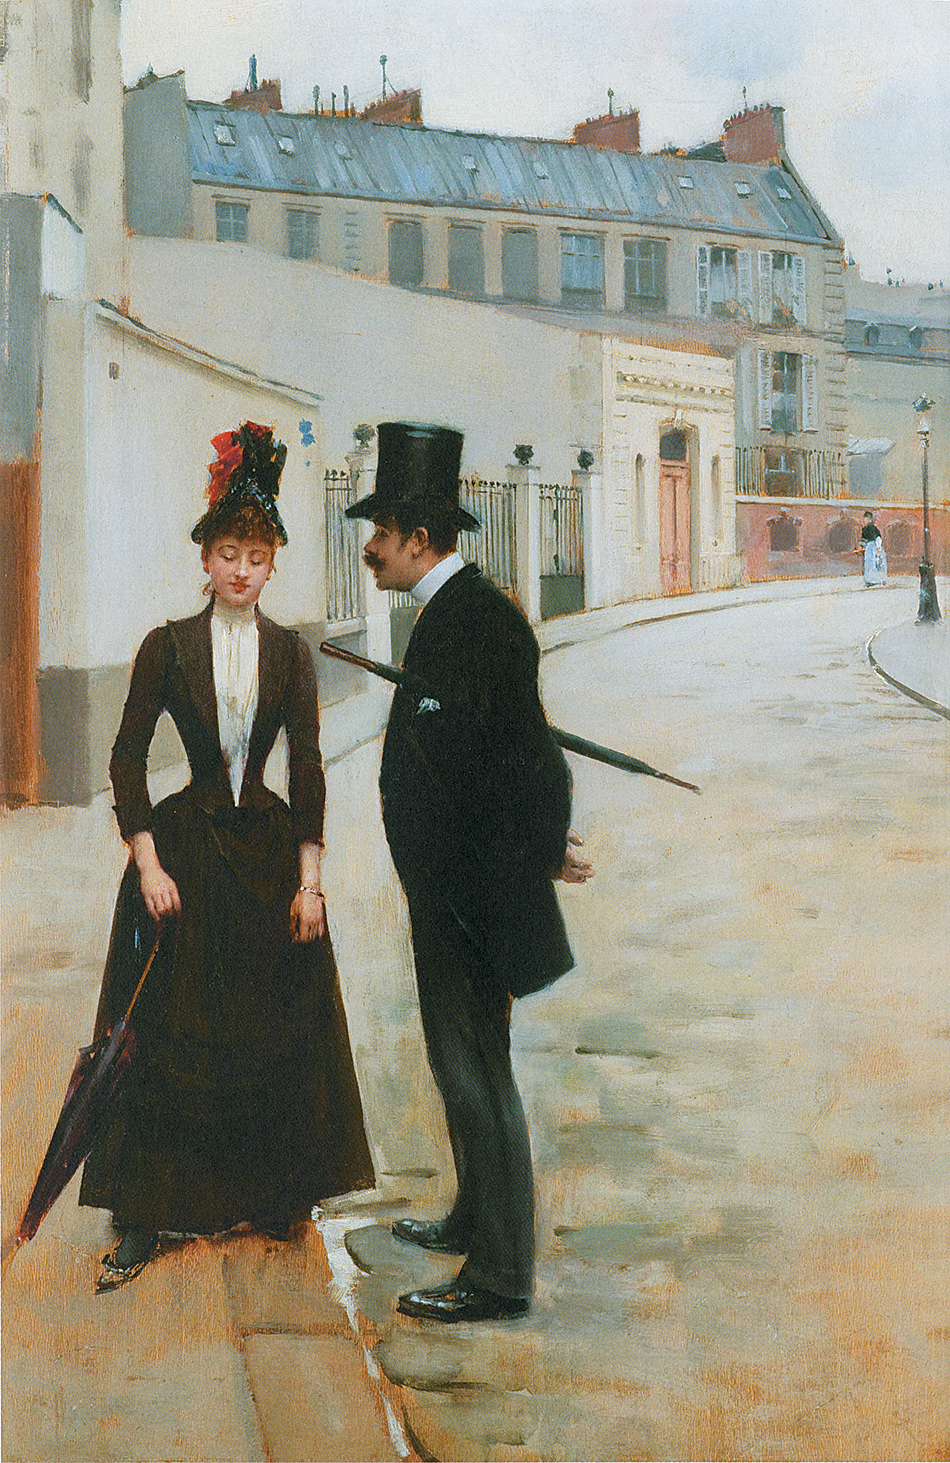 Jean Béraud: The Proposition or The Assignation in the Rue Chateaubriand, circa 1885